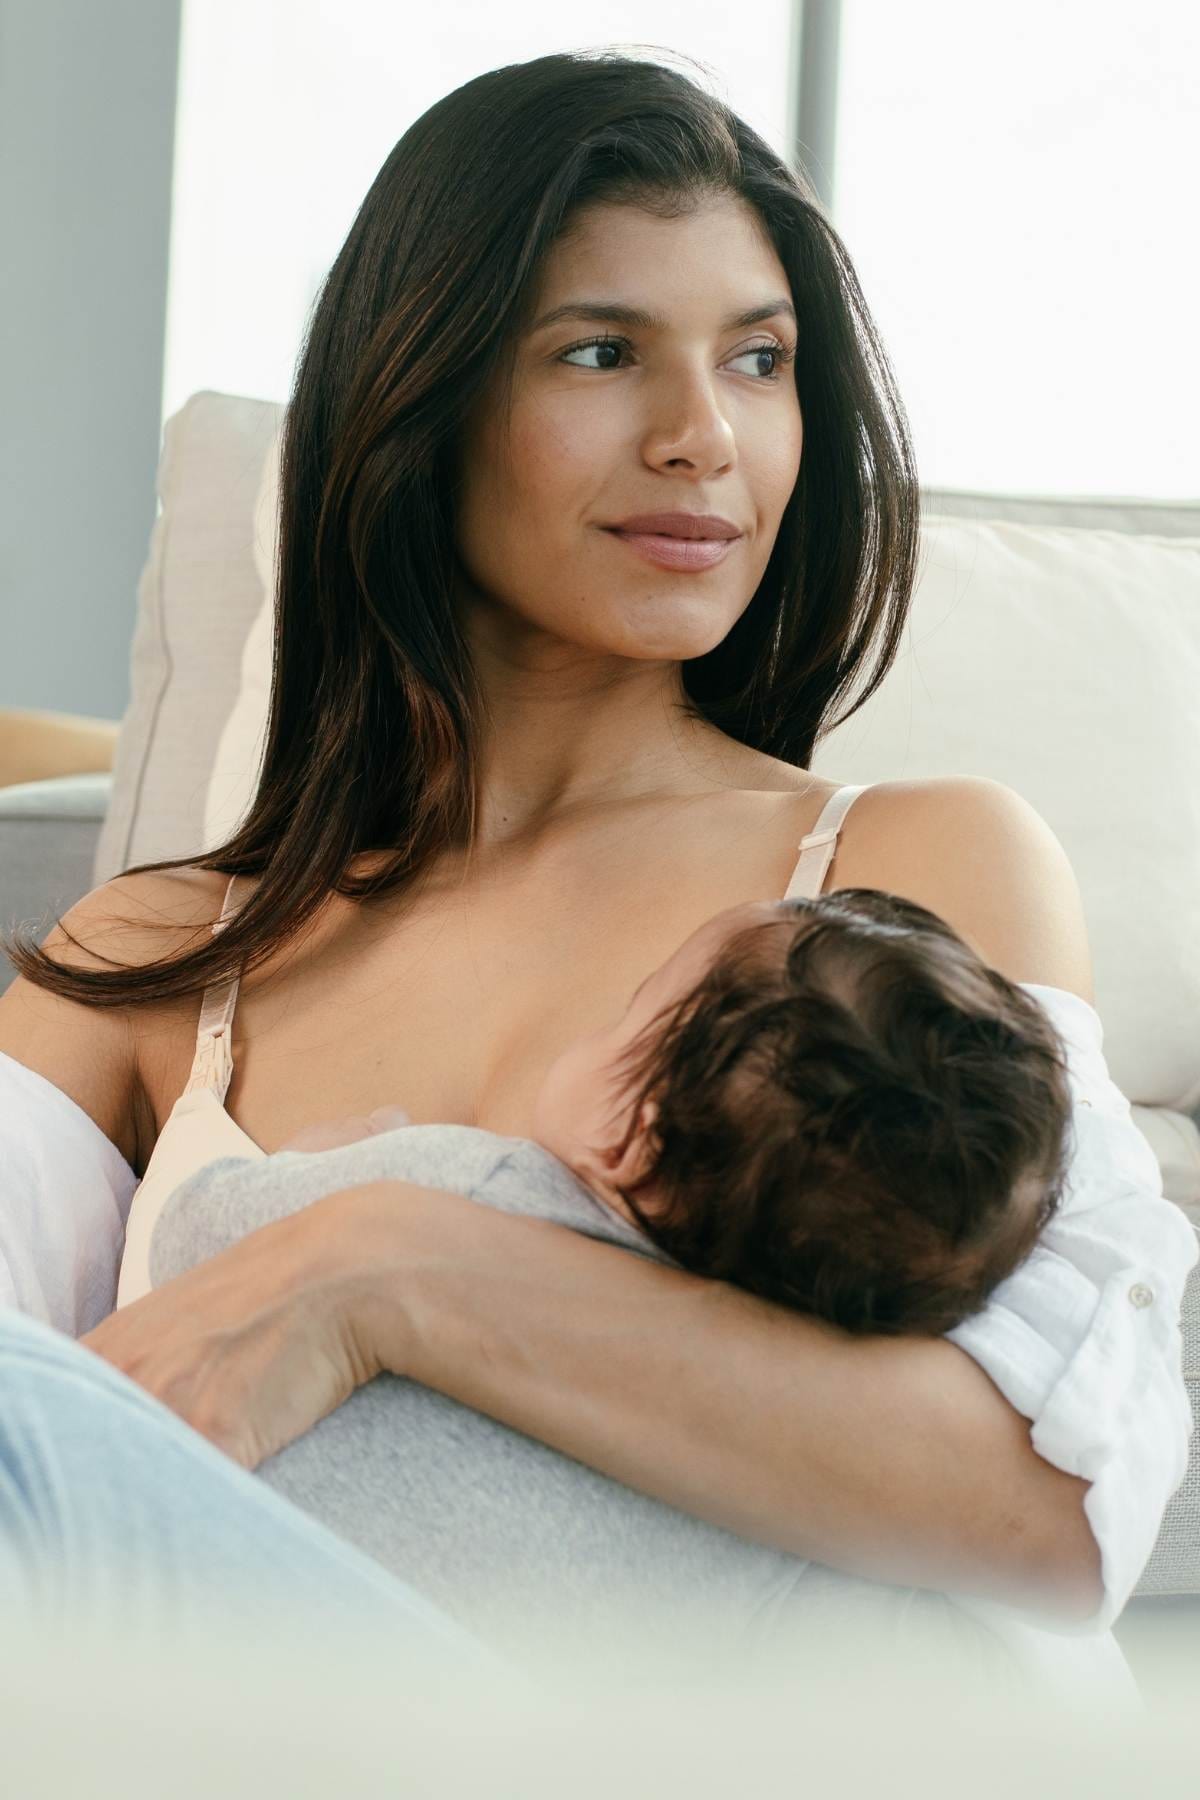 Kiinde - Kiinde and Simple Wishes GIVEAWAY! We're giving away a Kiinde  Twist Breastfeeding Gift Set bundled with a Simple Wishes SuperMom Bra AND  a Simple Wishes Signature Hands Free Pumping Bra!